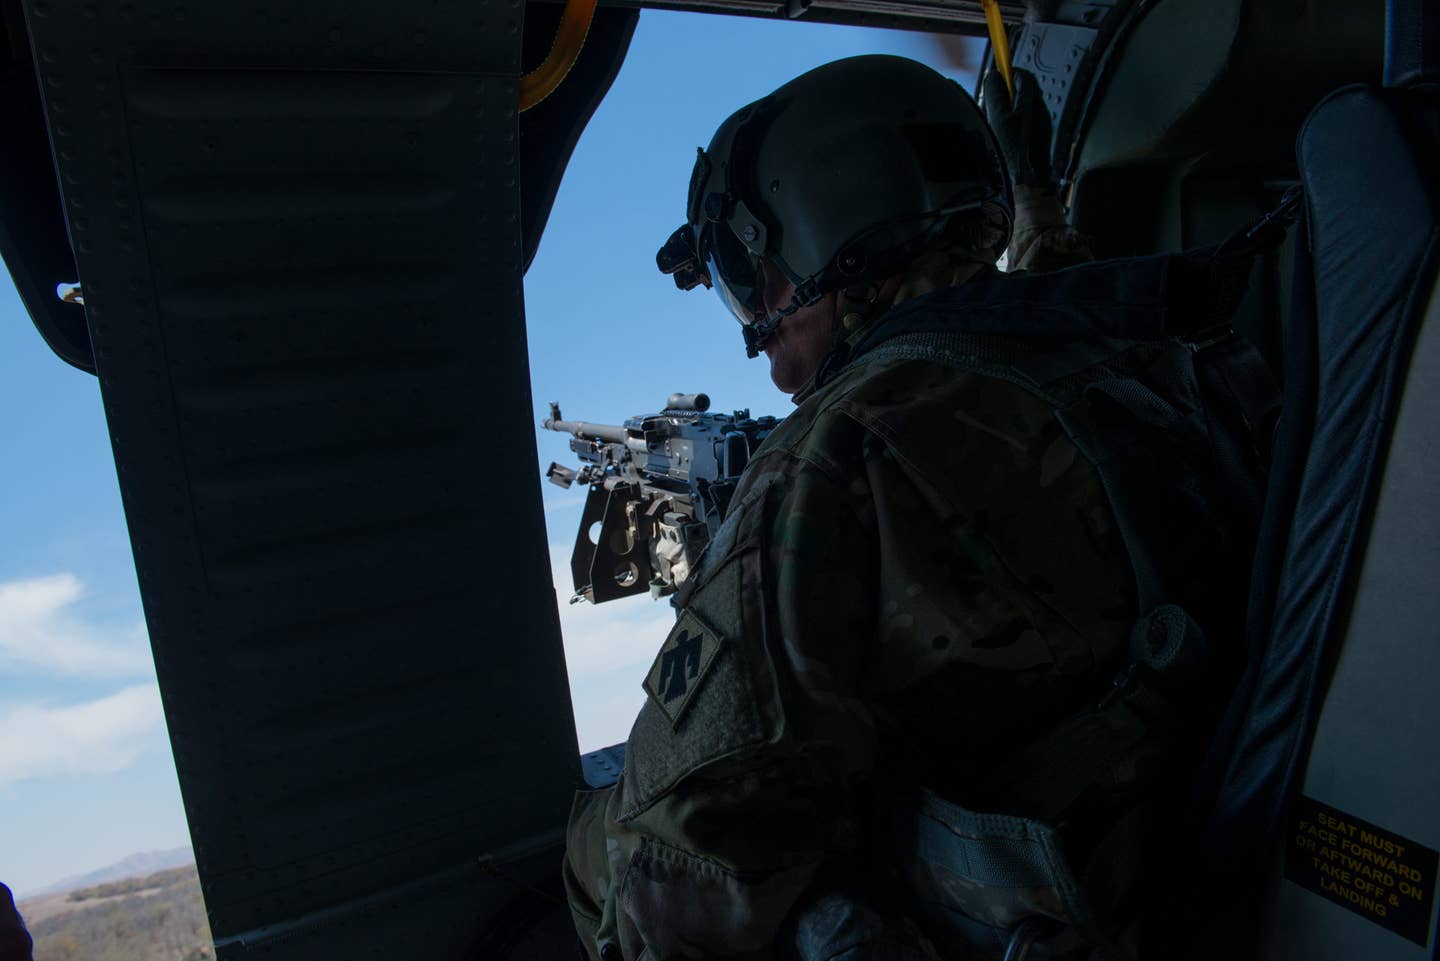 A door gunner on a UH-60 Black Hawk helicopter from the 244th Aviation Brigade, Oklahoma National Guard, scours the earth below during joint training at Falcon Bombing Range, Fort Sill, Okla., Mar. 22, 2017. (U.S. Air National Guard photo by Senior Master Sgt. Andrew M. LaMoreaux/Released)